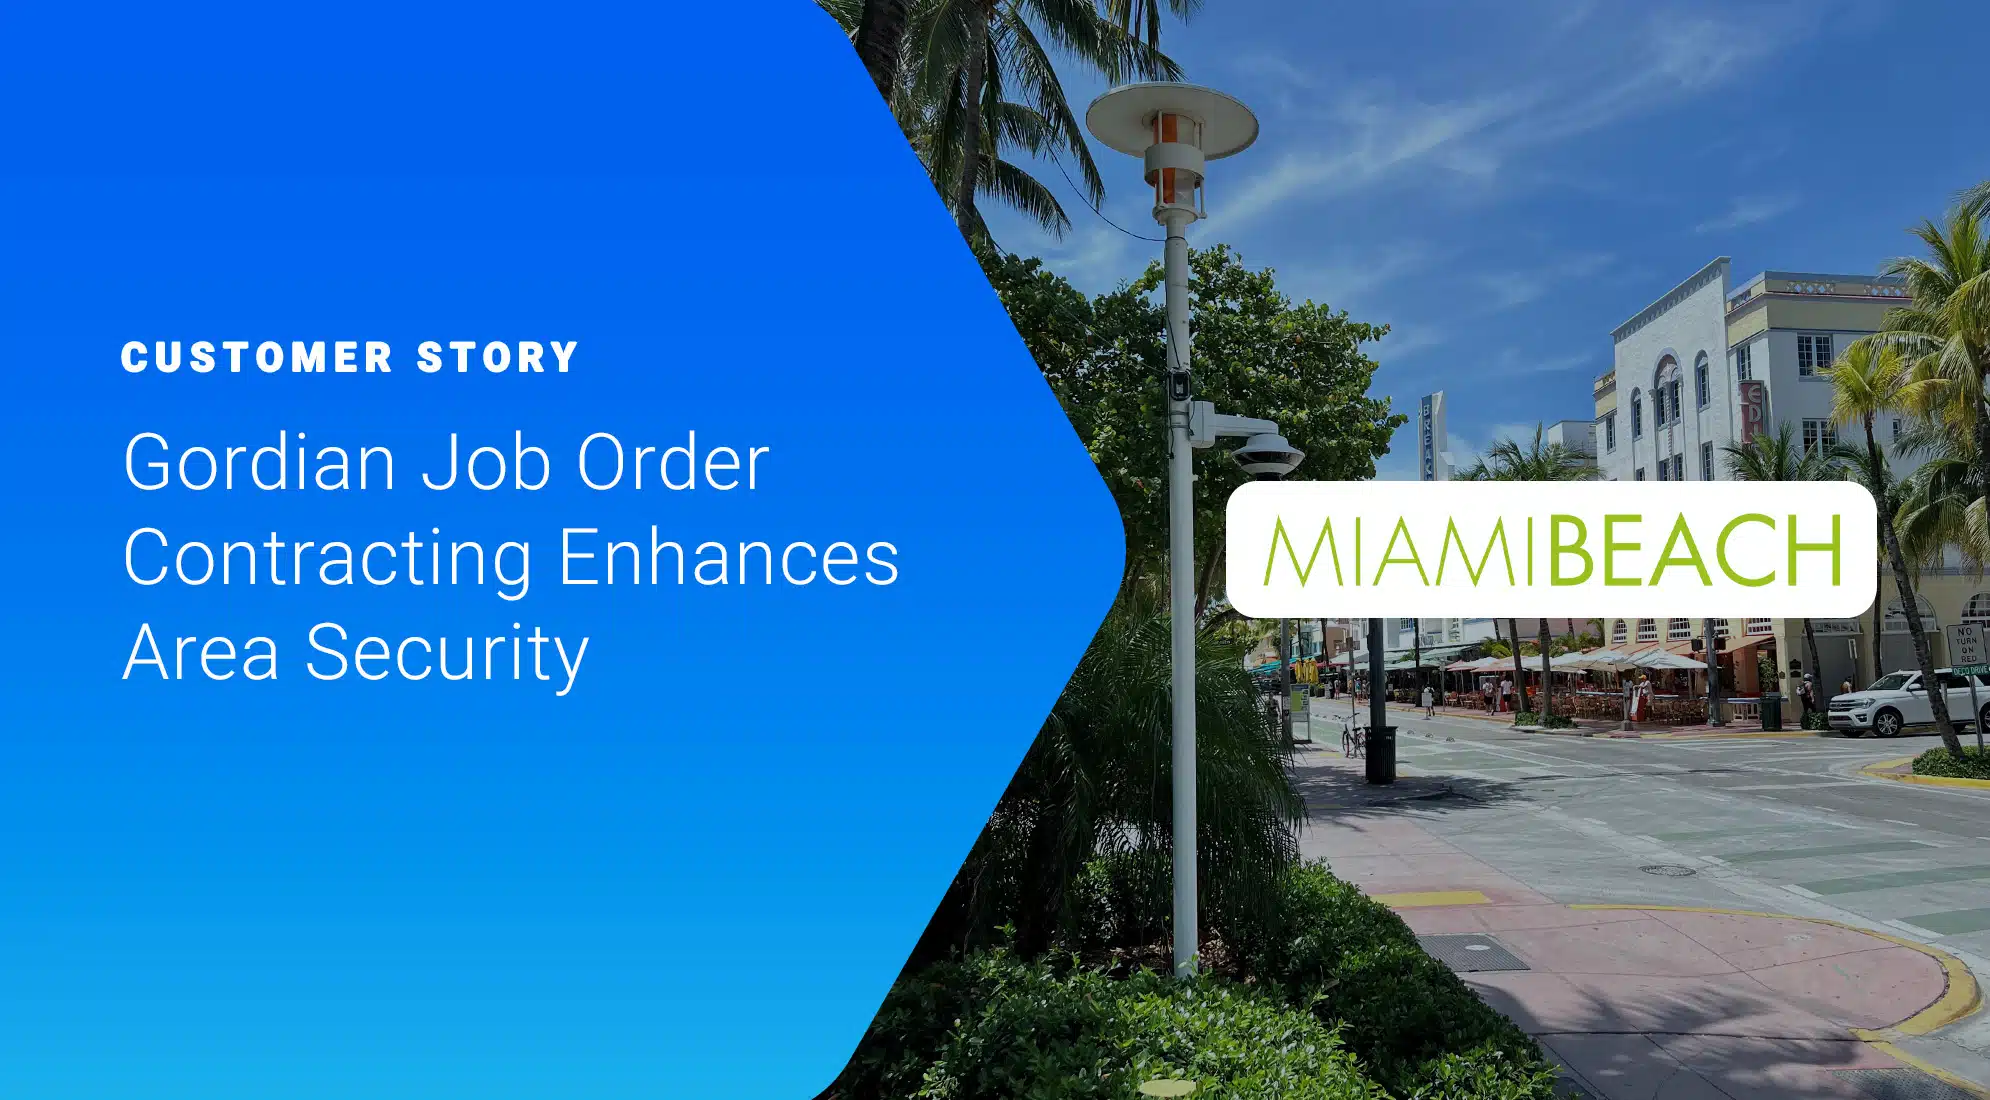 Miami Beach Completes Public Safety Project 2